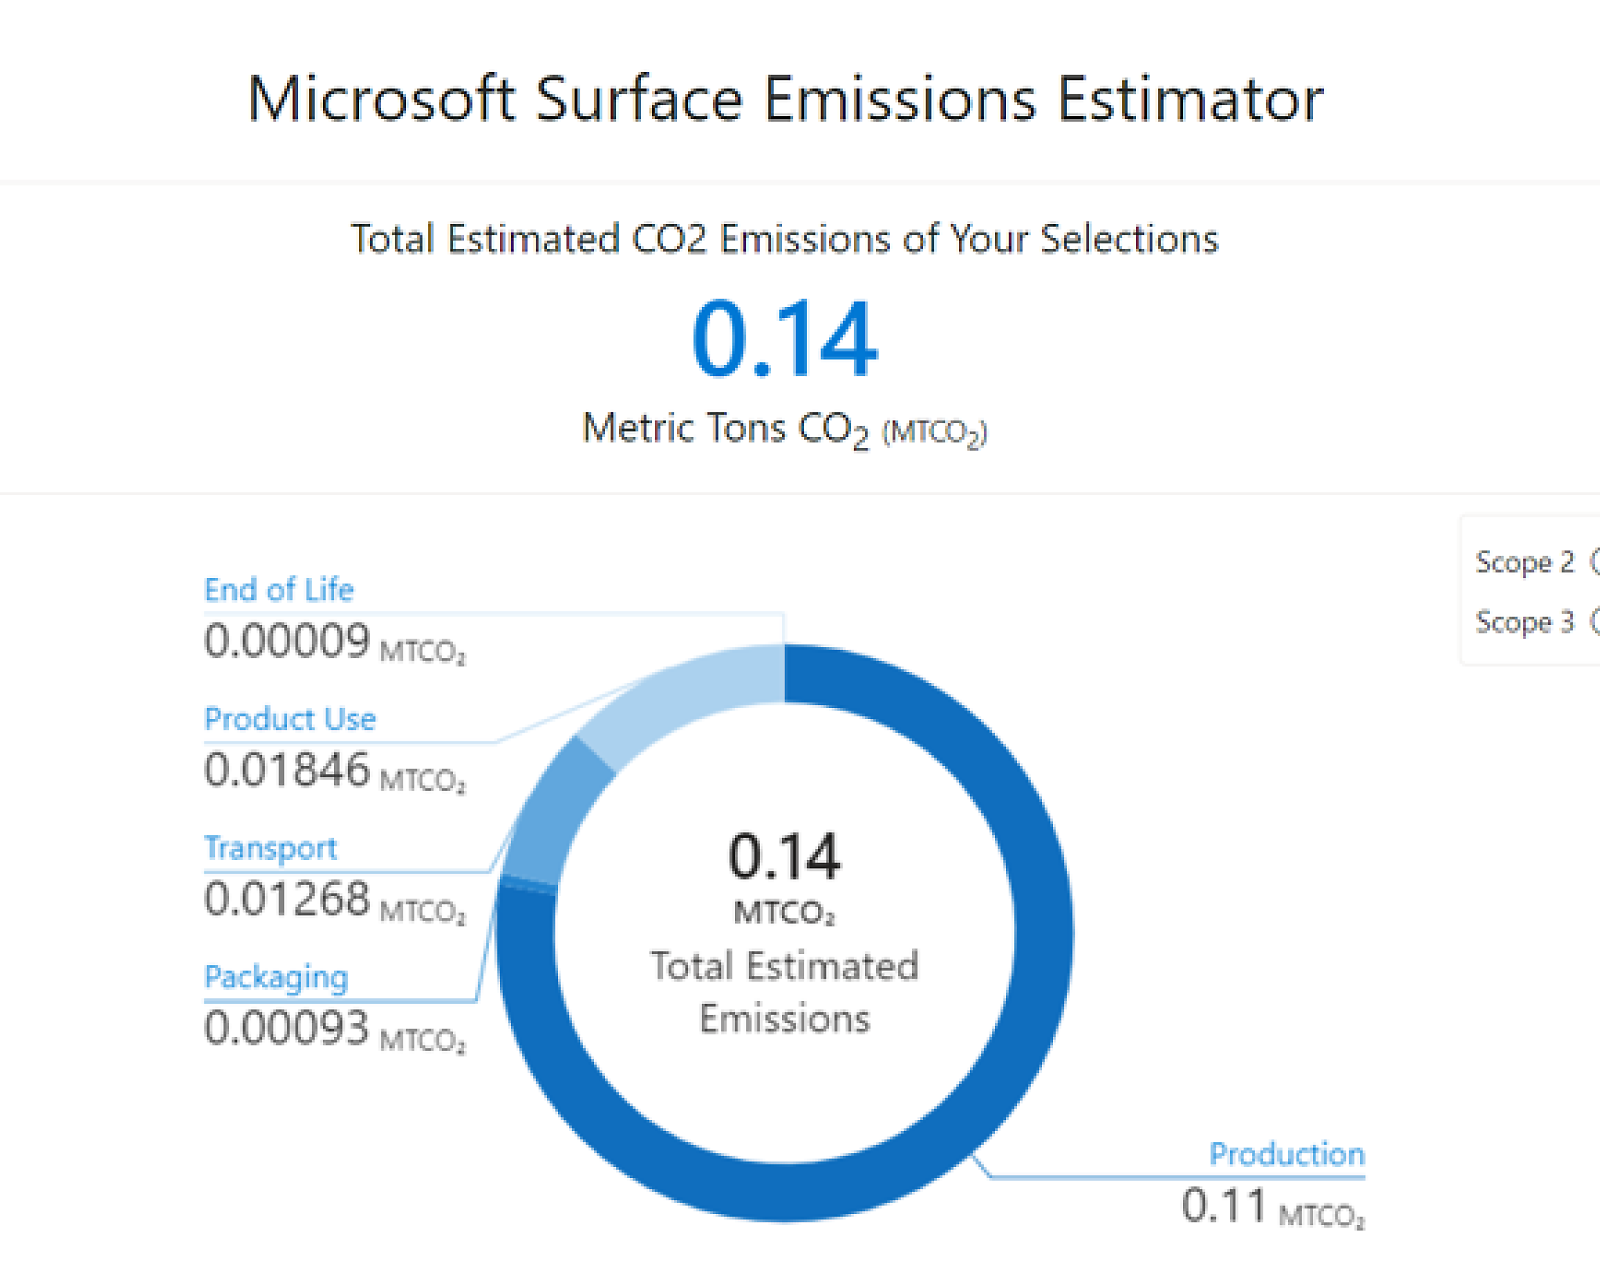 A Microsoft Surface Emissions Estimator graphic showing total estimated CO2 emissions of 0.14 metric tons